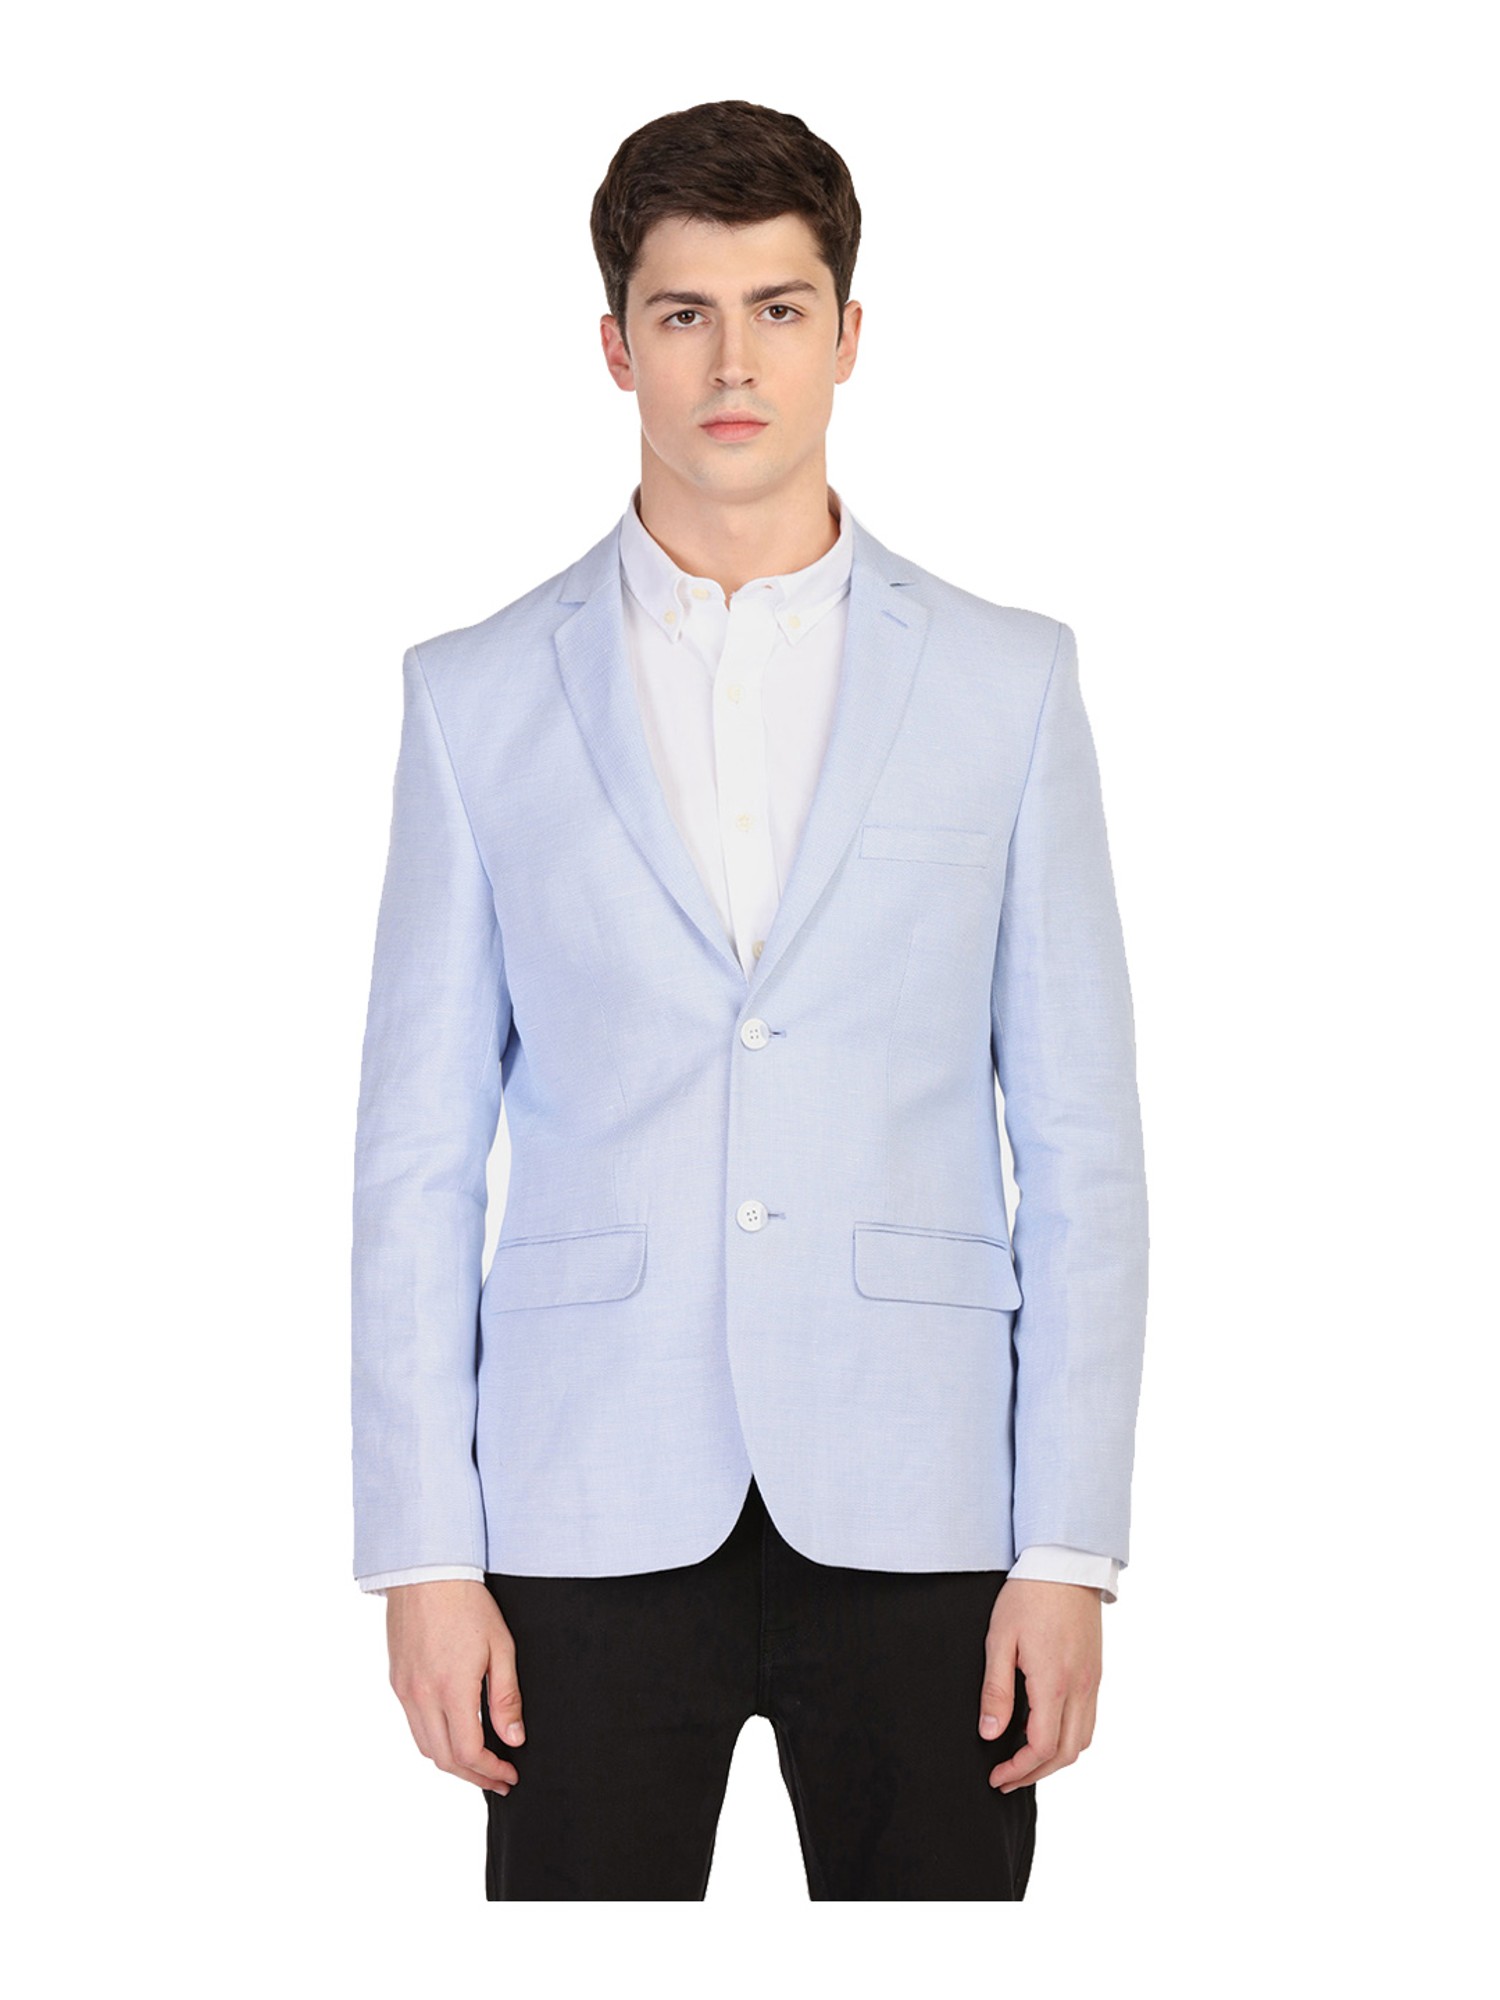 Buy WINTAGE Mens DoubleBreasted Linen Sky Blue Blazer 36 XS at Amazonin